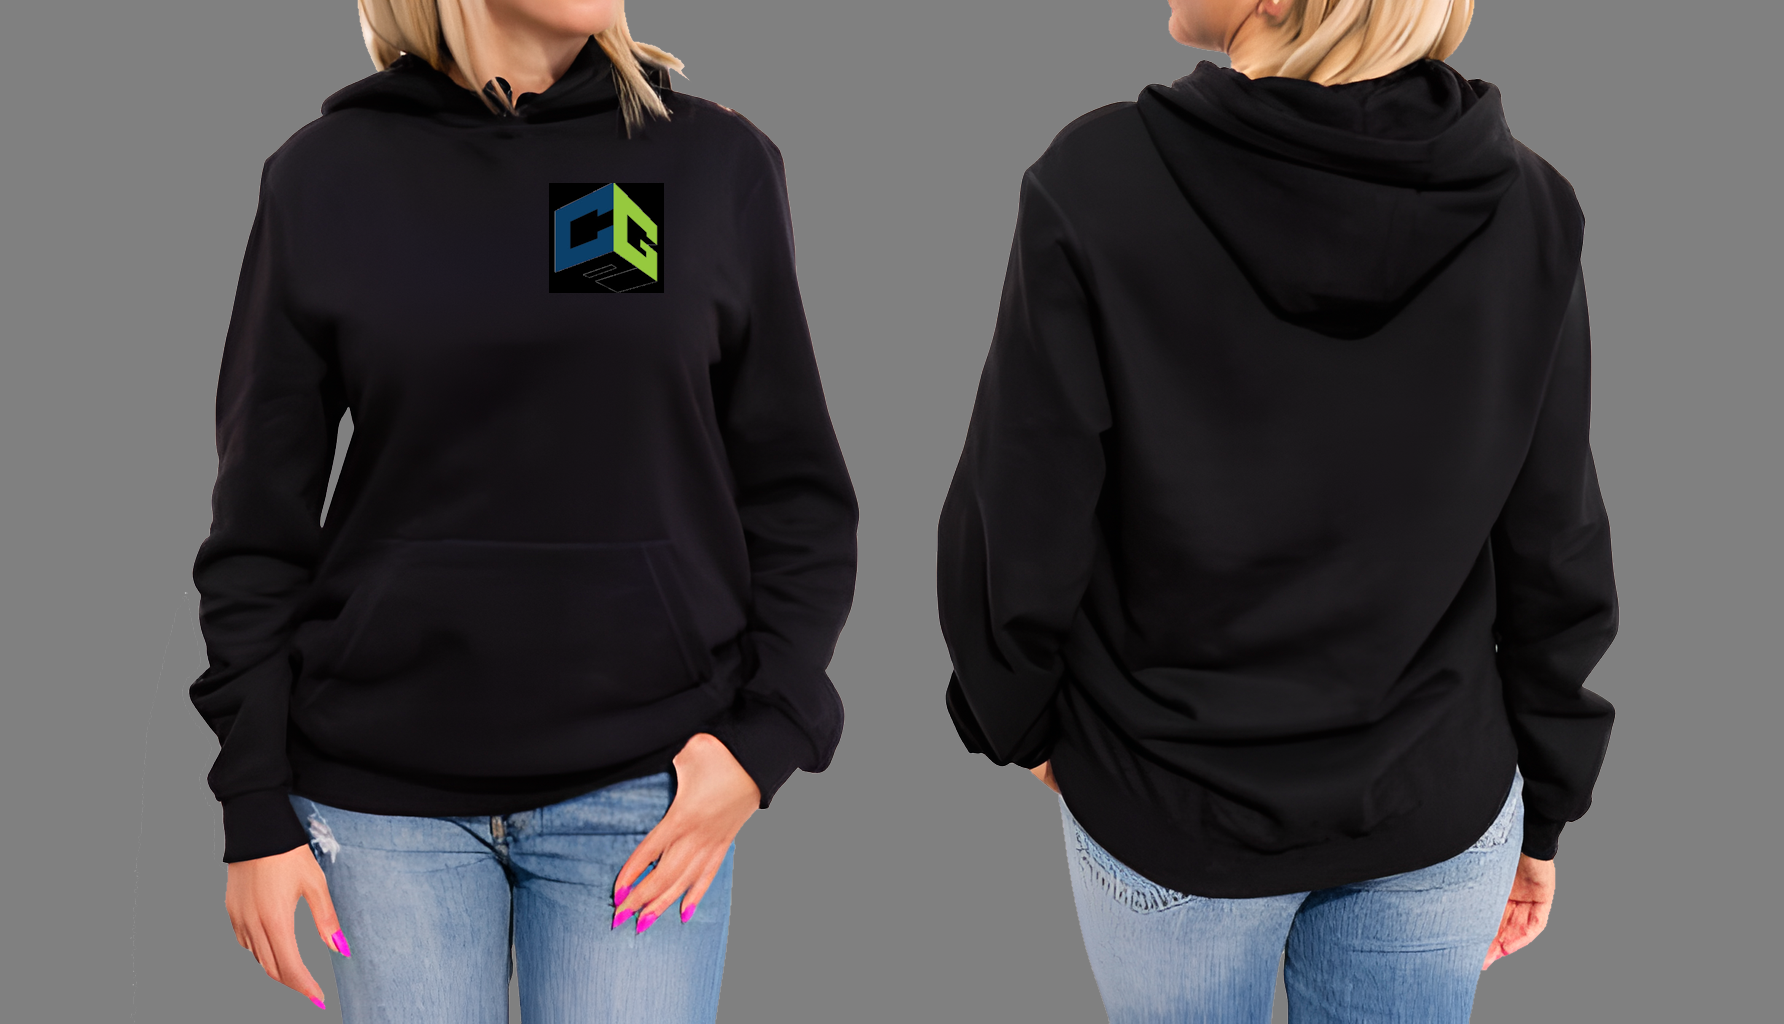 Hoodie Printing for Local Business Promotion